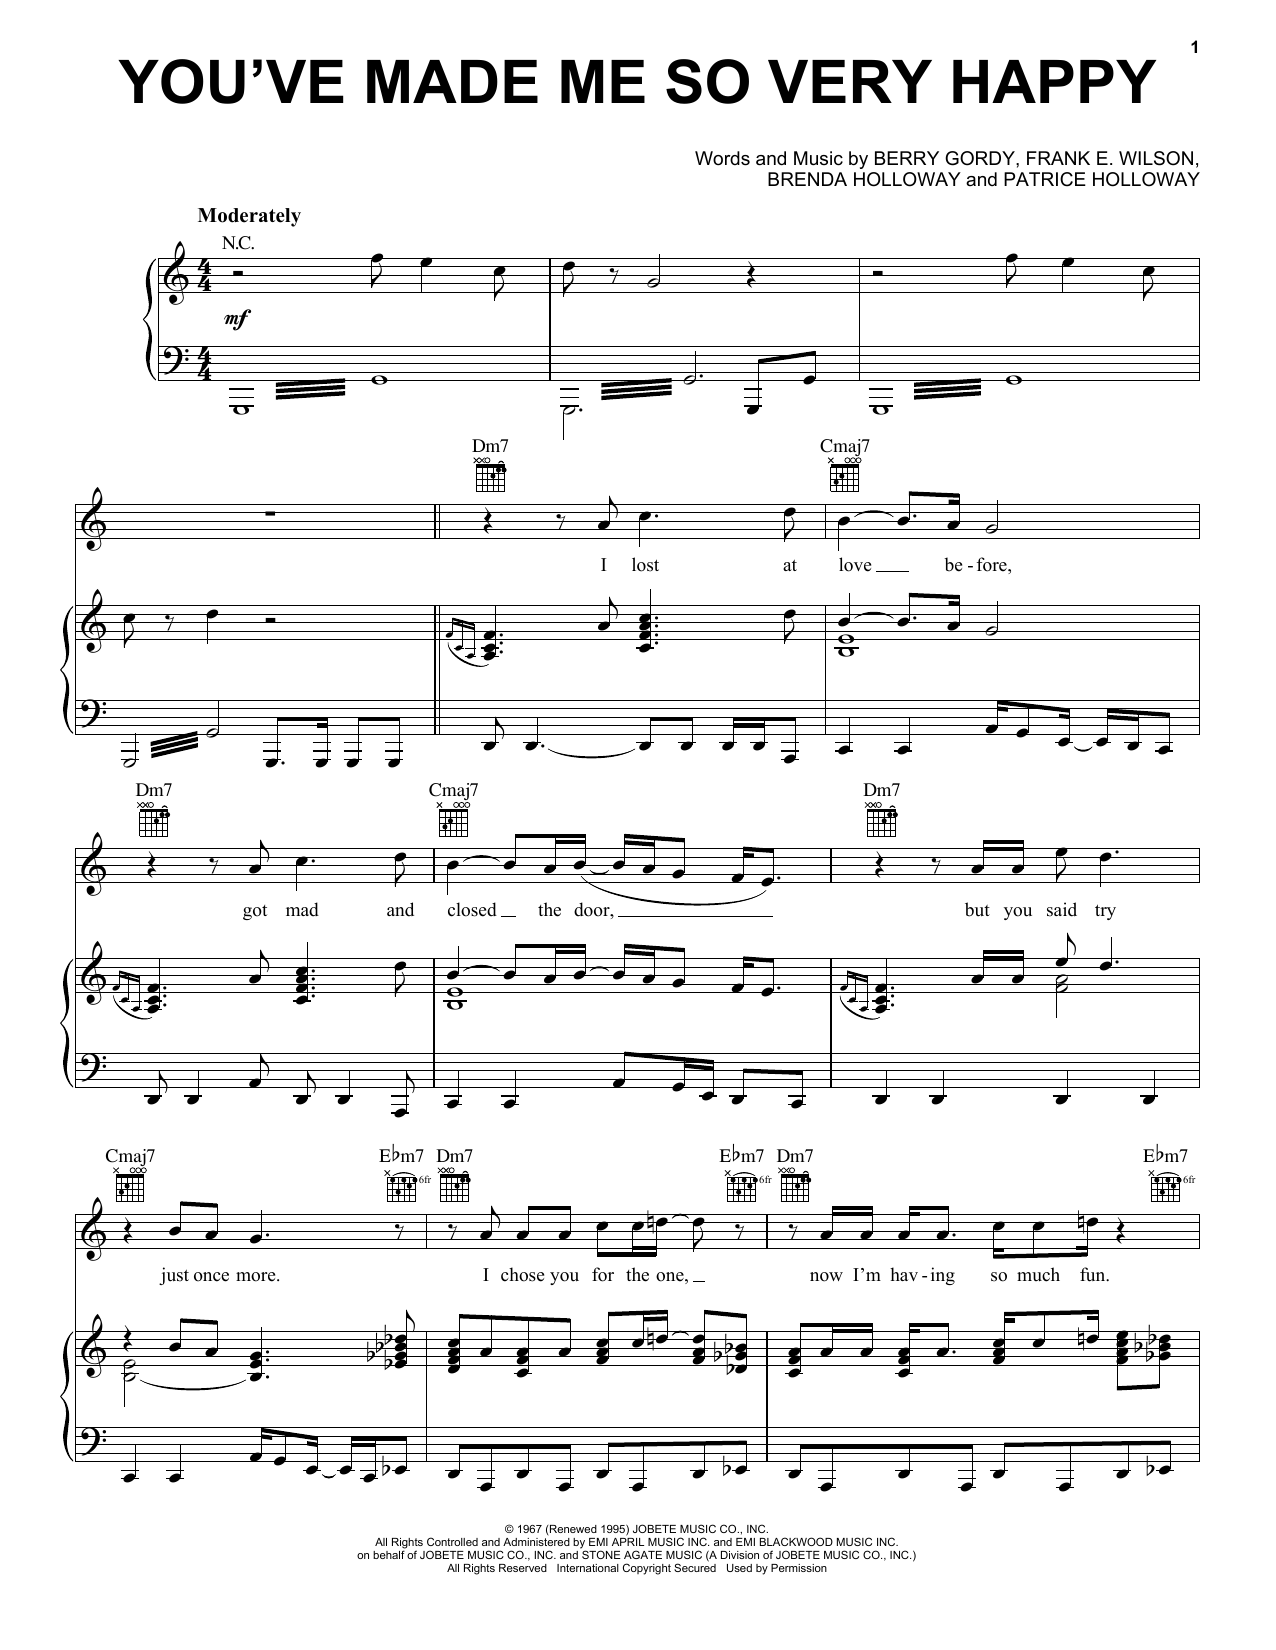 Blood, Sweat & Tears You've Made Me So Very Happy sheet music preview music notes and score for Piano, Vocal & Guitar (Right-Hand Melody) including 7 page(s)